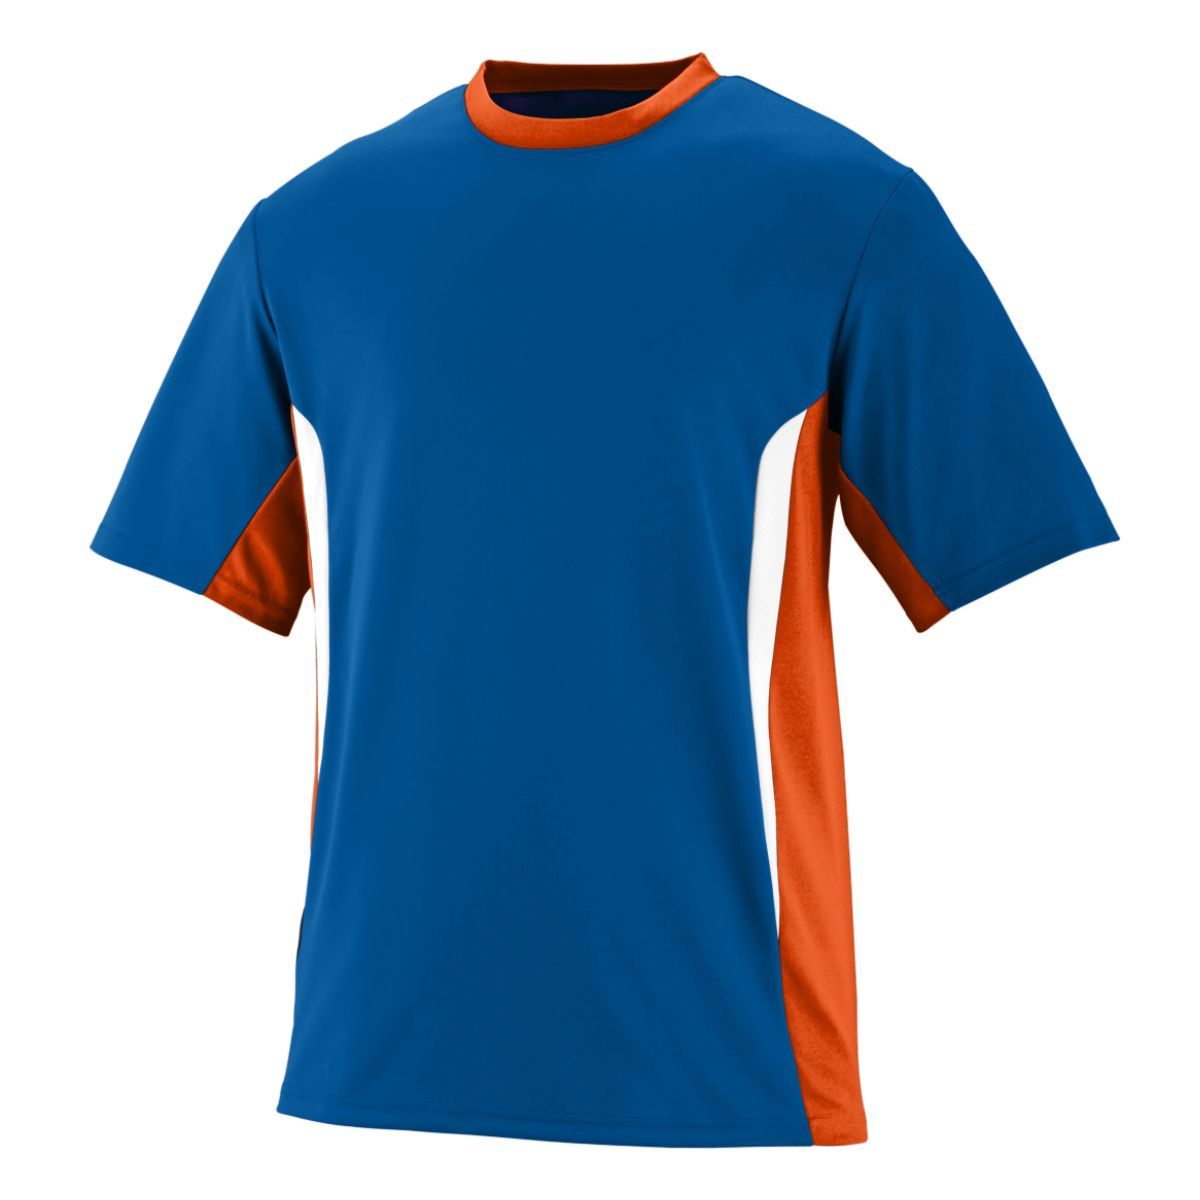 Augusta Sportswear Surge Jersey in Royal/Orange/White  -Part of the Adult, Adult-Jersey, Augusta-Products, Softball, Shirts product lines at KanaleyCreations.com